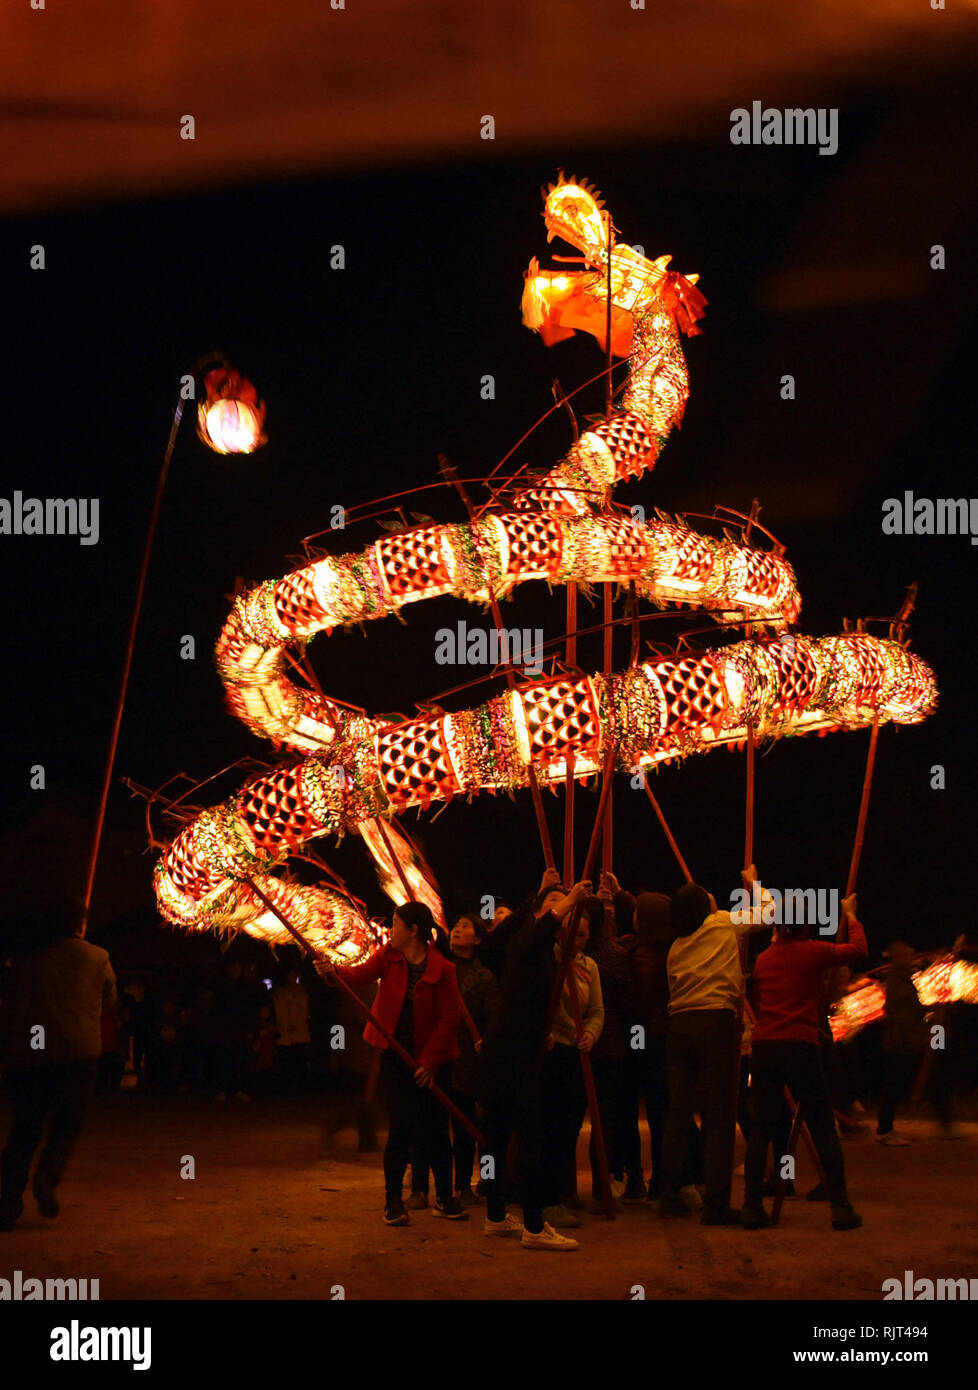 Beijing, China's Hunan Province. 6th Feb, 2019. Villagers perform dragon dance during a parade to celebrate the Chinese Lunar New Year at Xiatuan Village of Chengbu Miao Autonomous County in Shaoyang City, central China's Hunan Province, Feb. 6, 2019. Credit: Yan Qinlong/Xinhua/Alamy Live News Stock Photo